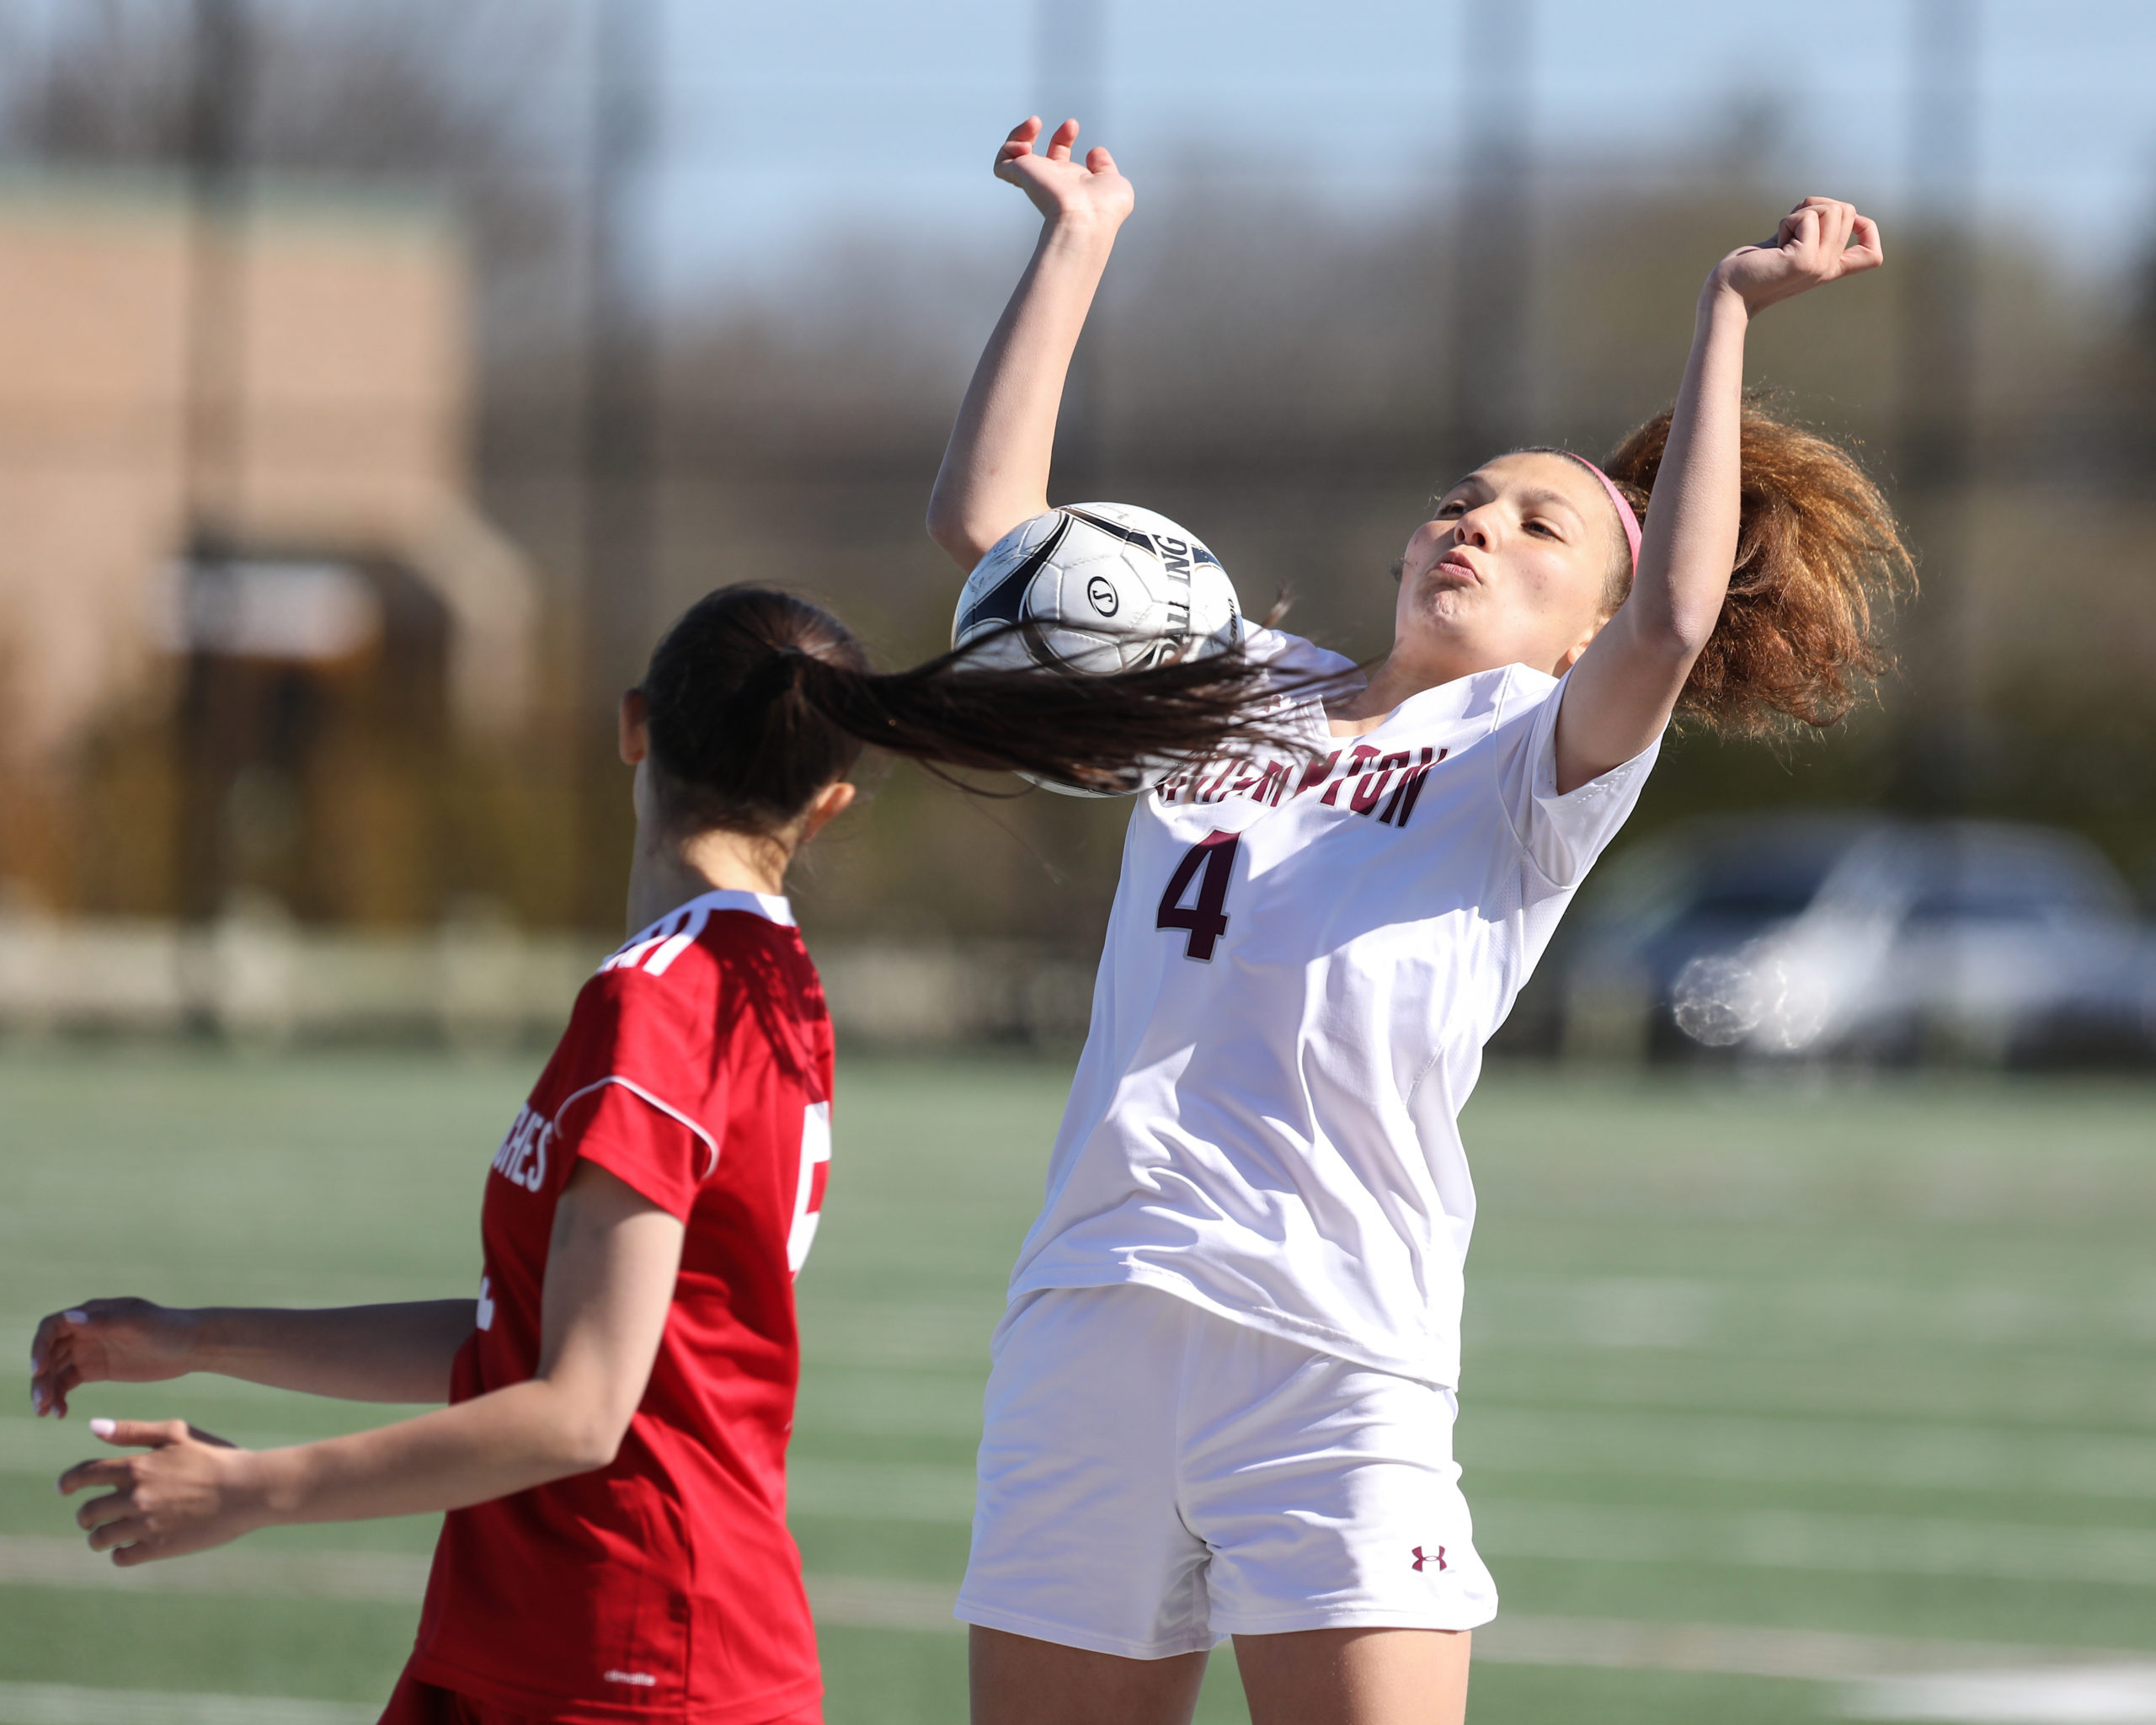 Southampton junior Gabriella Arnold uses her body to keep the ball in play.